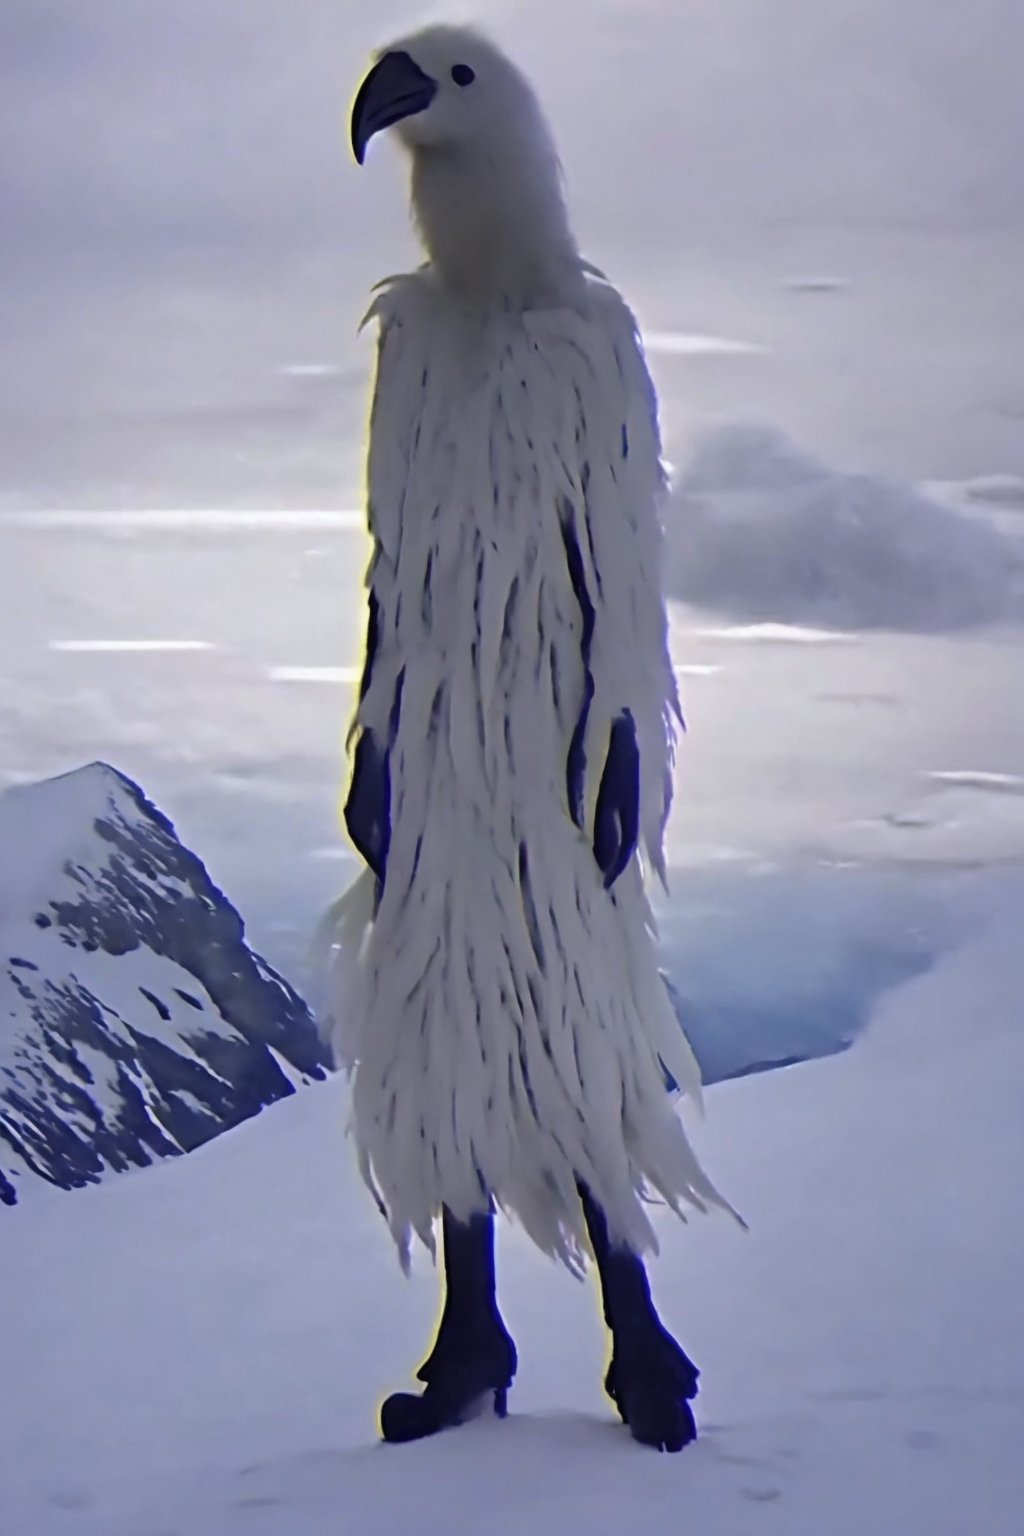 Opium bird, standing, feathers, white feathers, bird, birdman, humanoid, bird head, with beak, stylized, thin, full body, bird legs, bird arms, sinister, terrifying, beautiful

High quality, HD, 4kHD, cinematic, atmospheric, realistic, ultra-realistic
snow, mountain, cloudy, gray sky, dark clouds
More Detail,lora:largebulg1-000012:1,AIDA_NH_humans